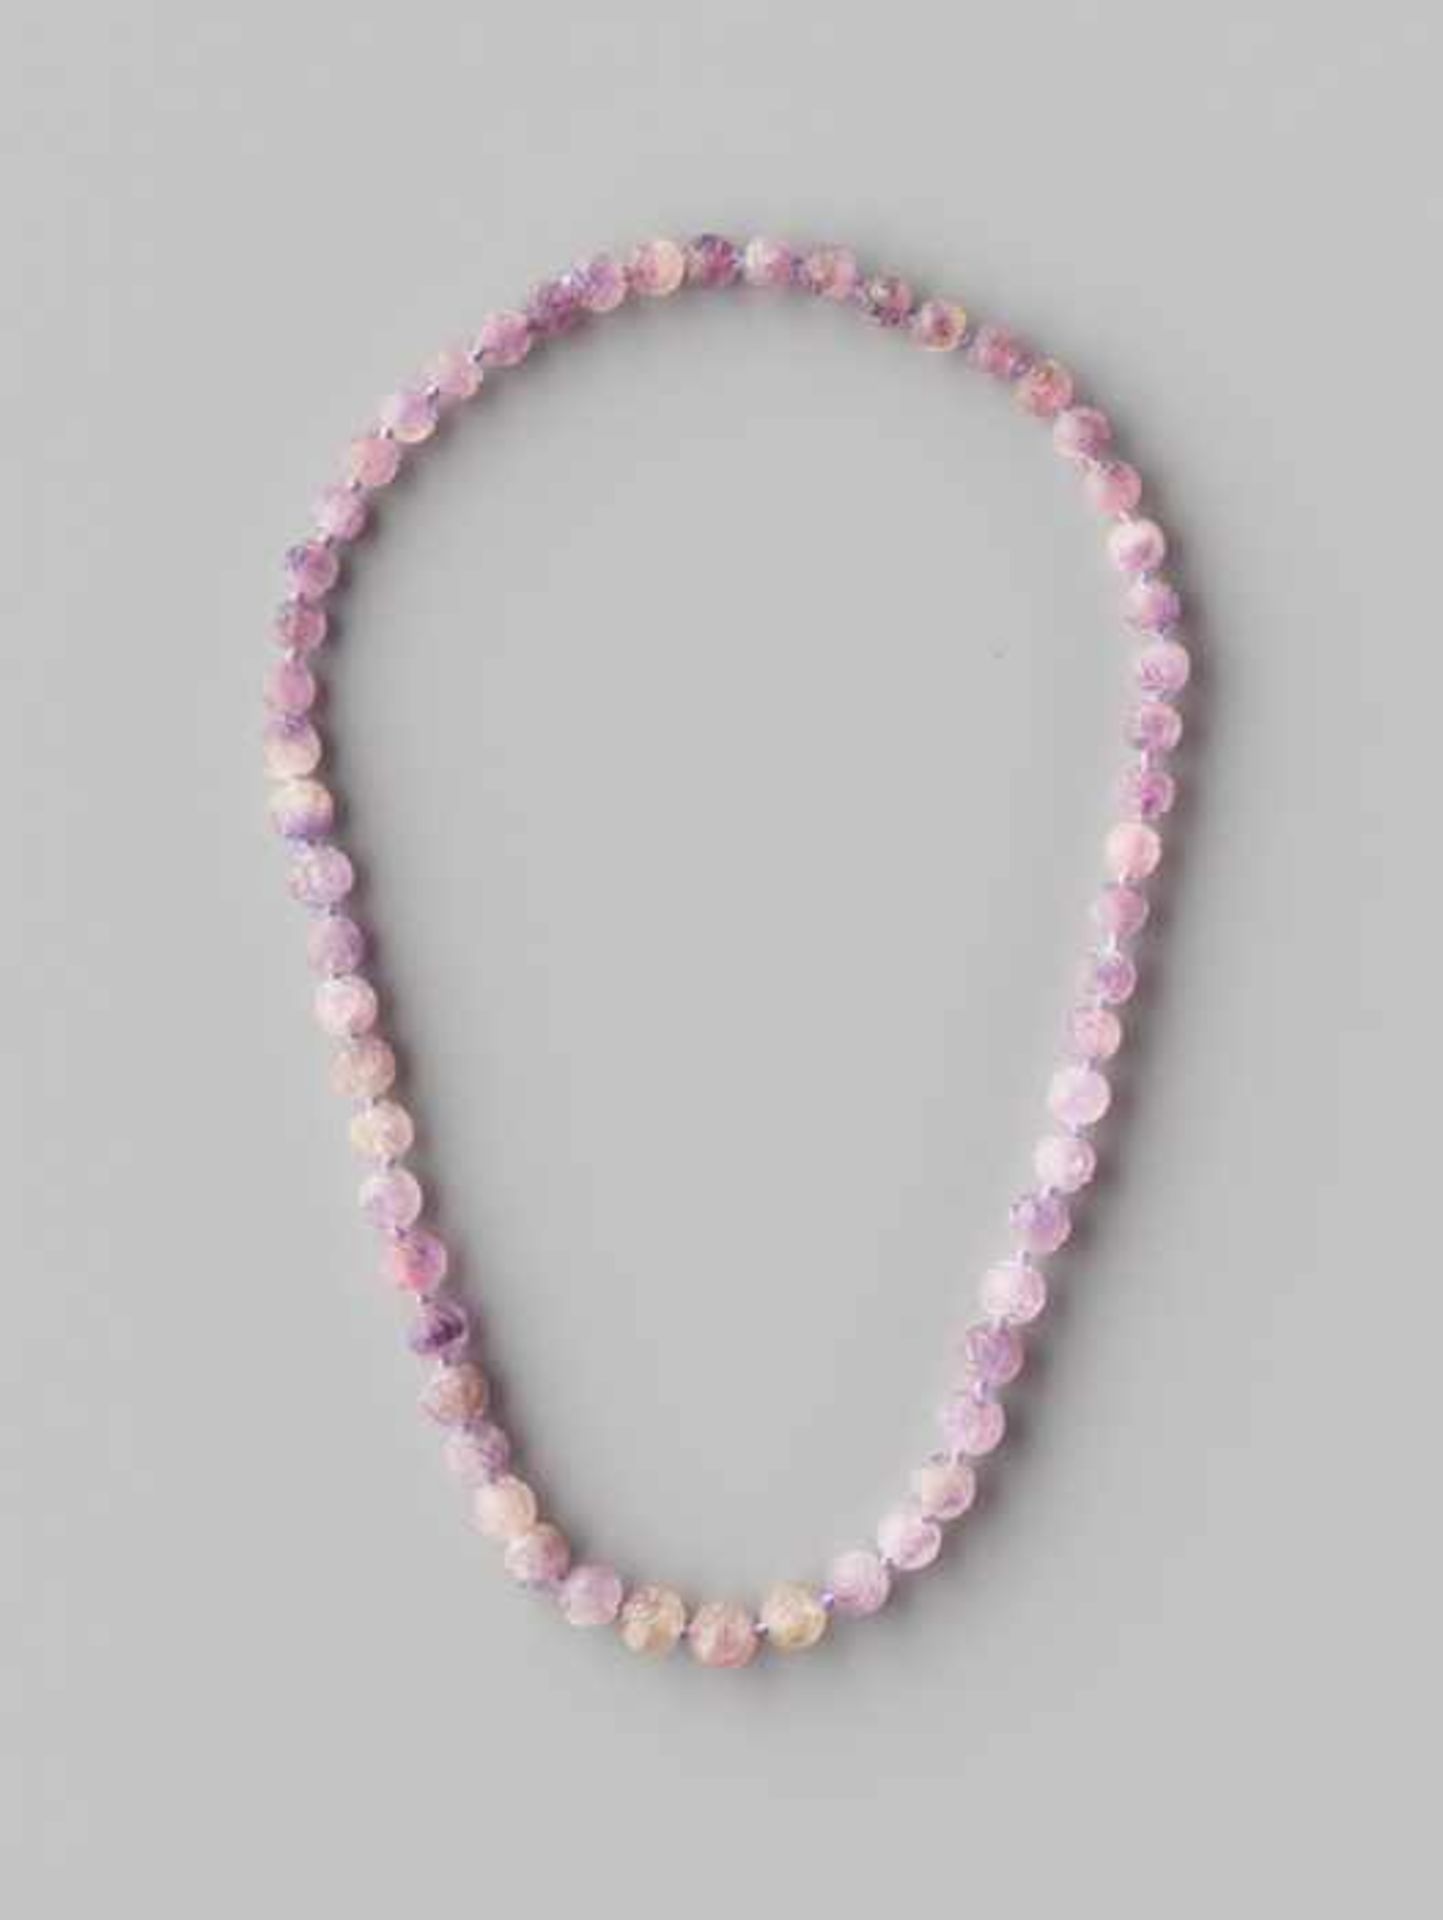 AN AMETHYST BEAD ‘SHOU’ NECKLACE, 56 BEADS, QING DYNASTY The amethyst beads with varying colors from